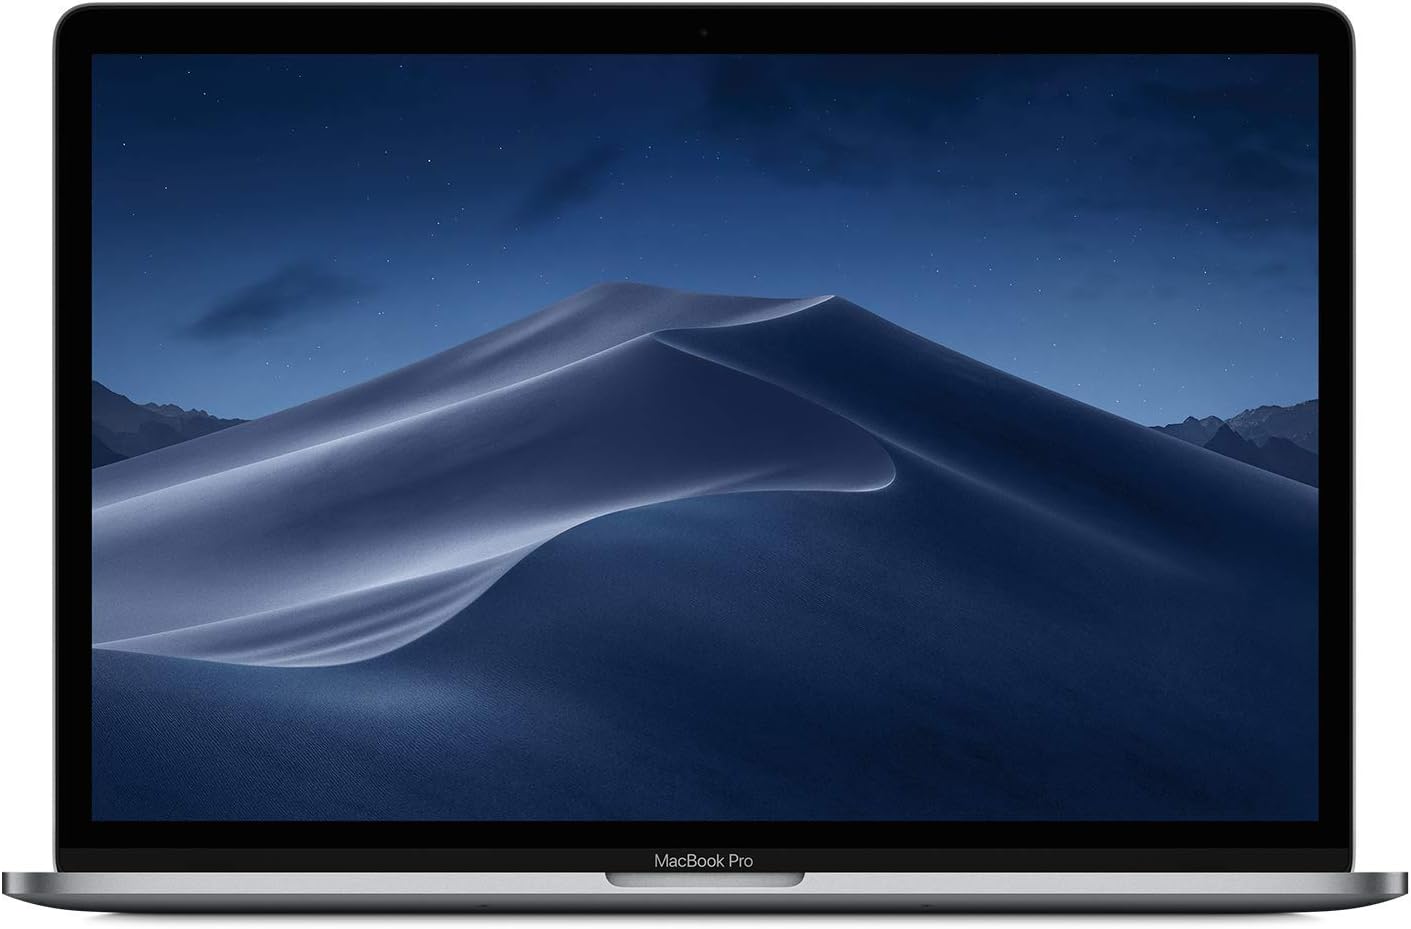 Mid 2019 Apple MacBook Pro with 2.9GHz Intel Core i9-9880H (16" 16GB RAM, 1TB NVME) Space Gray (Renewed)